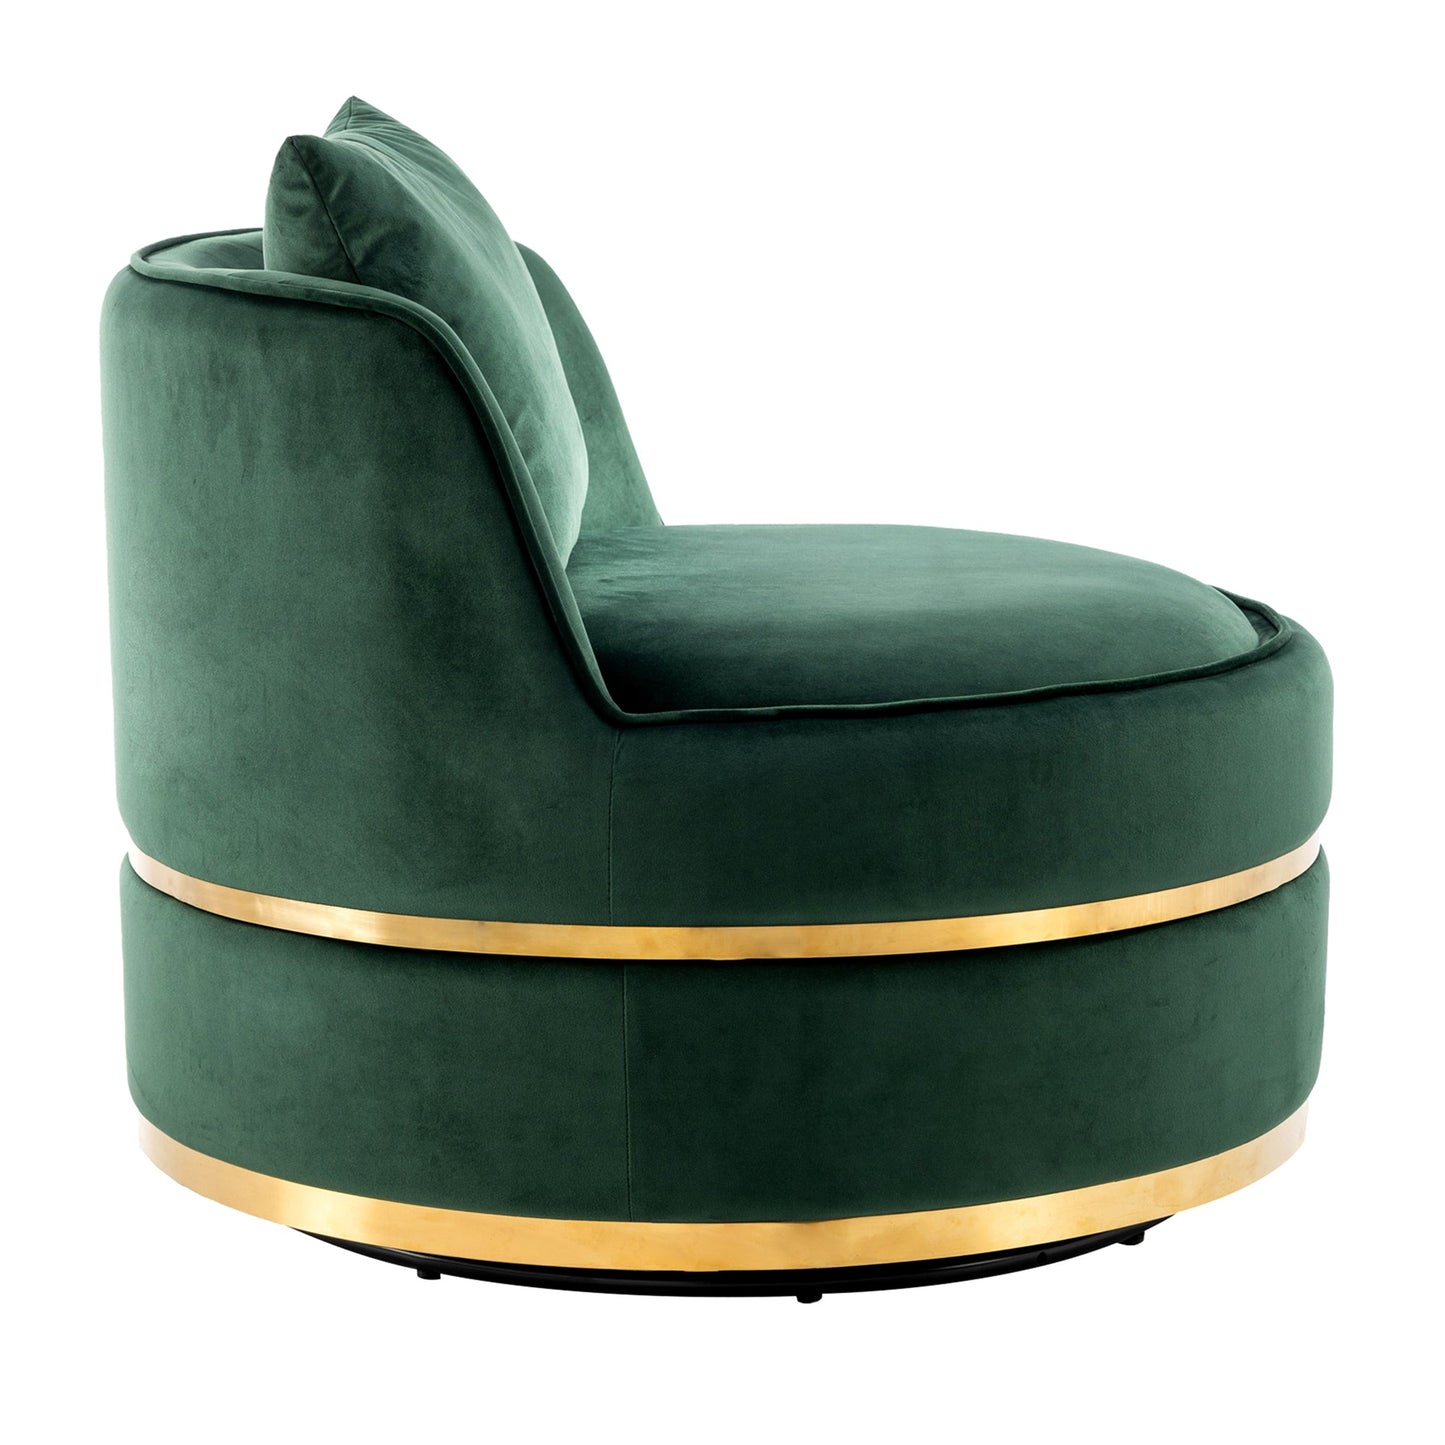 360 Degree Swivel Velvet Accent Chair, Barrel Chair Over-Sized Soft Chair with Seat Cushion, Green